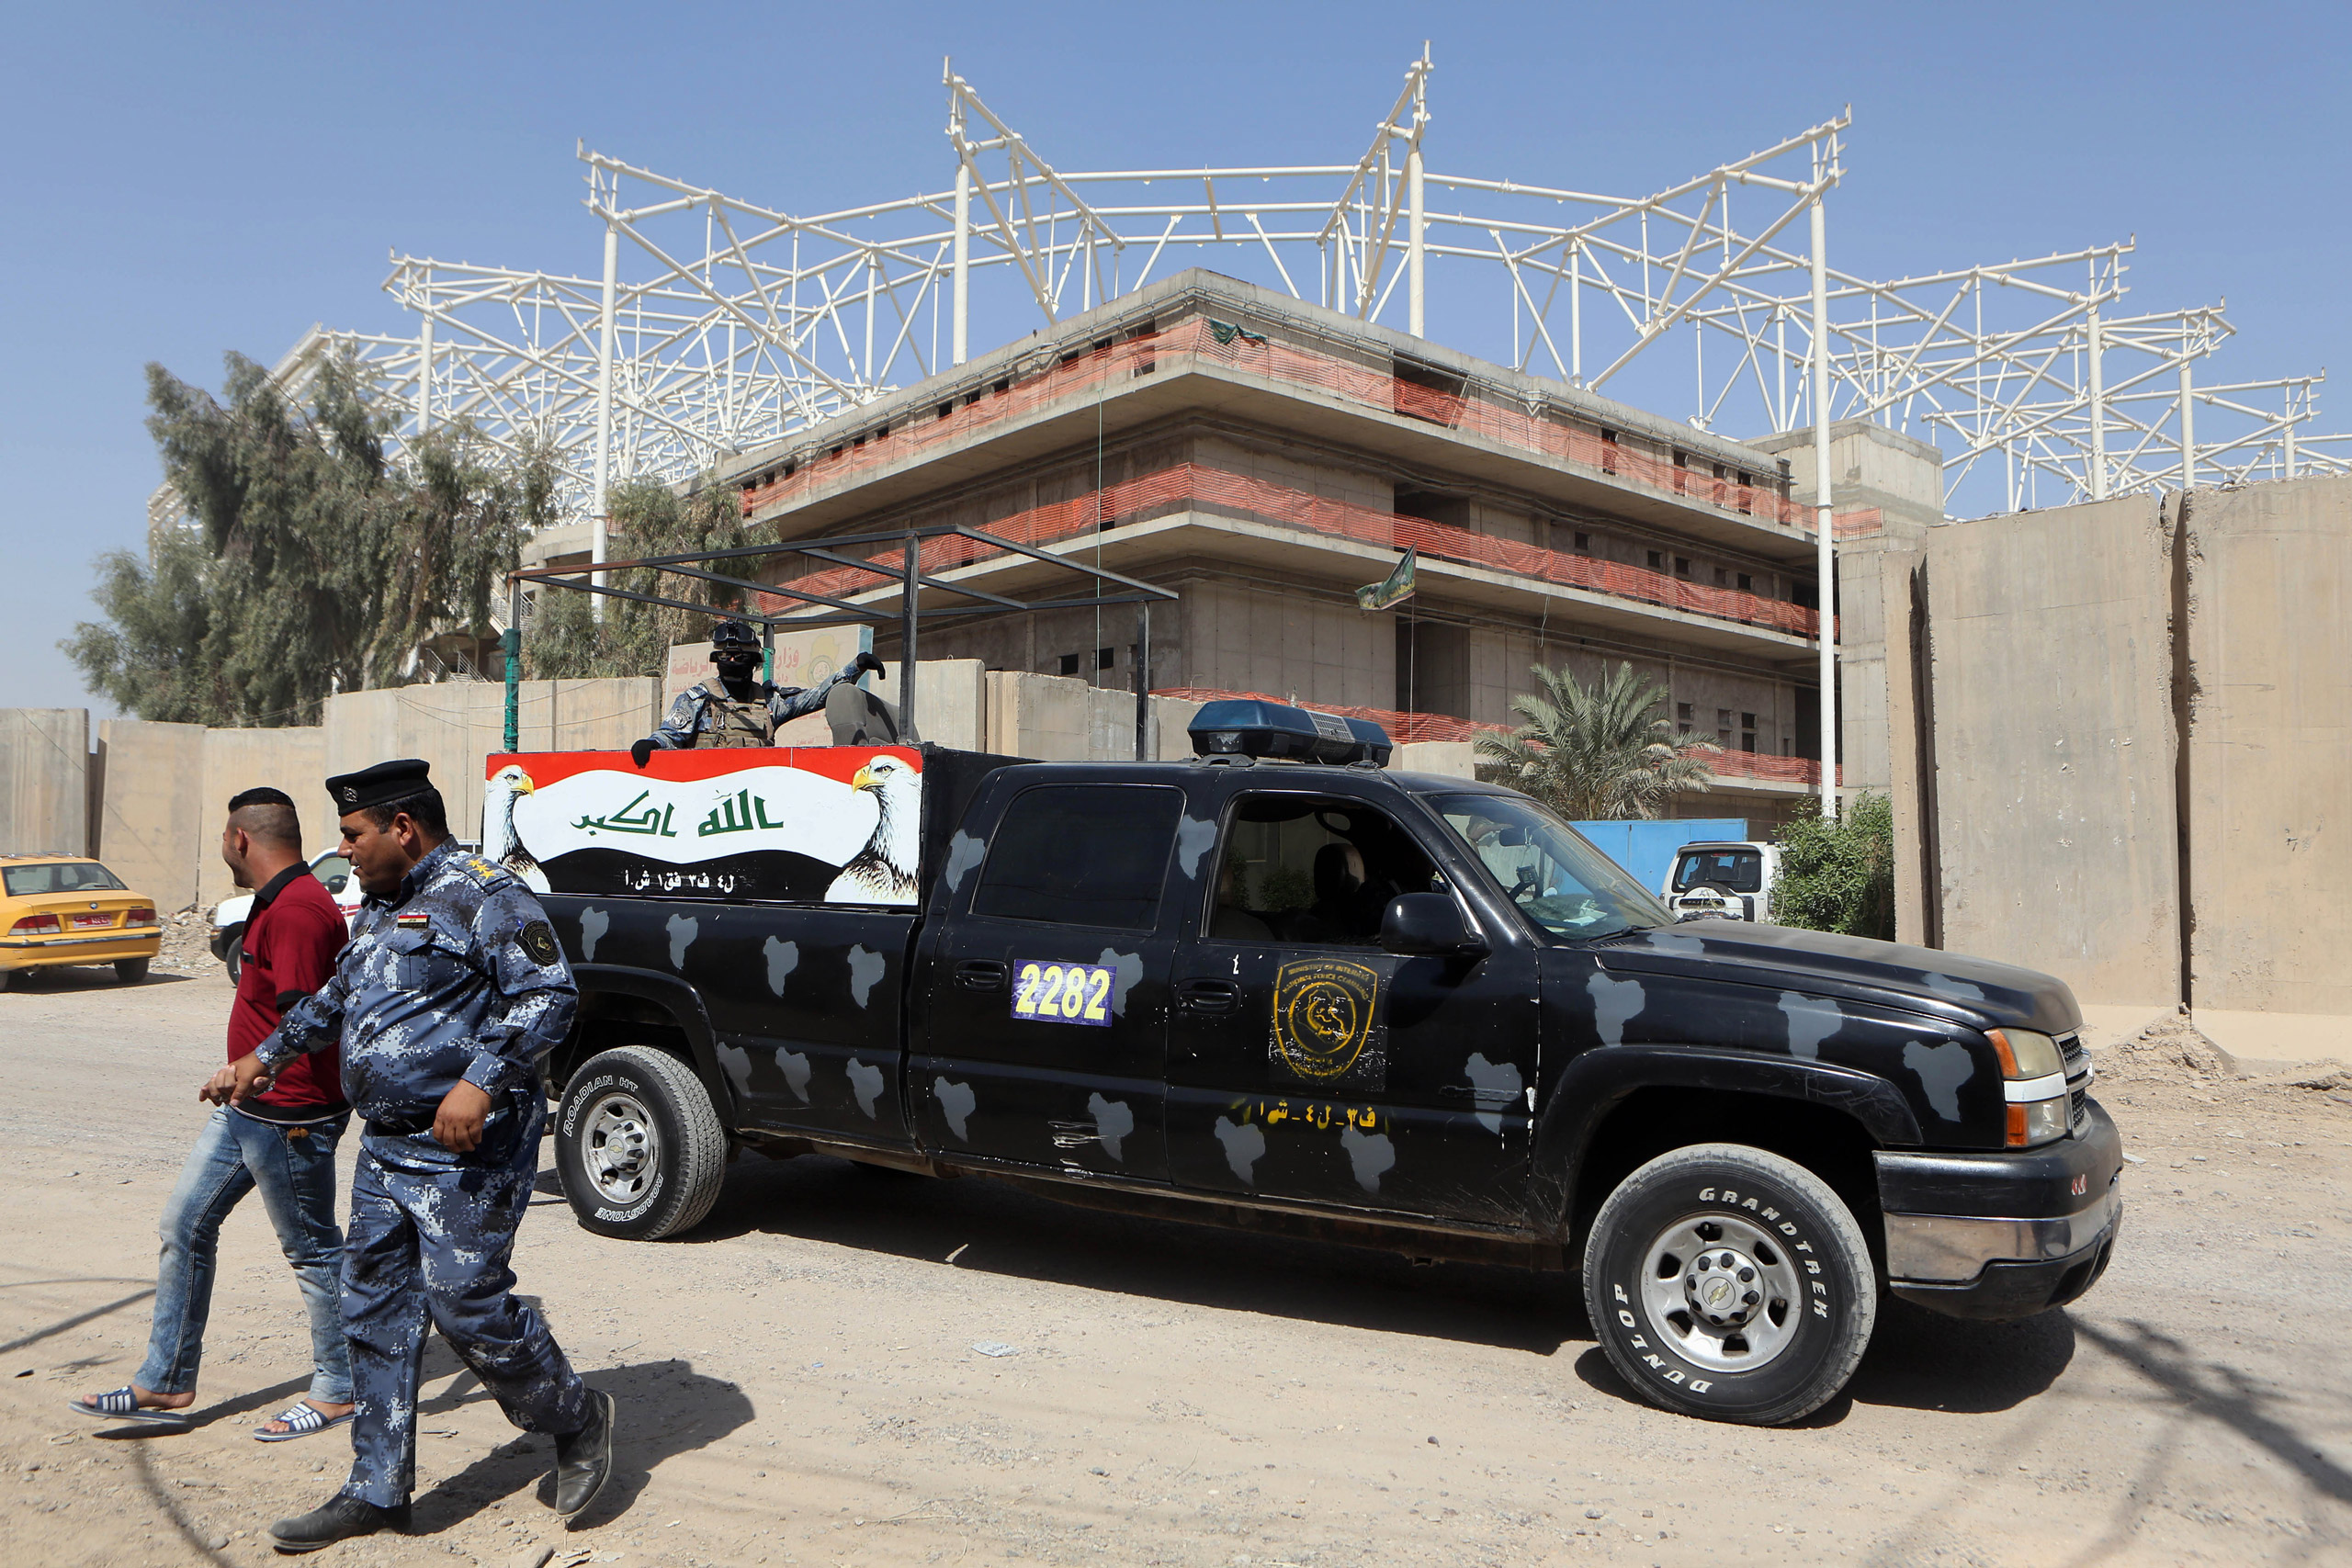 Iraqi security forces guard the entrance to a sports complex where 18 Turkish workers were kidnapped by masked men in military uniforms, according to Iraqi security officials, in Baghdad, on Sept. 2, 2015. (Khalid Mohammed—AP)